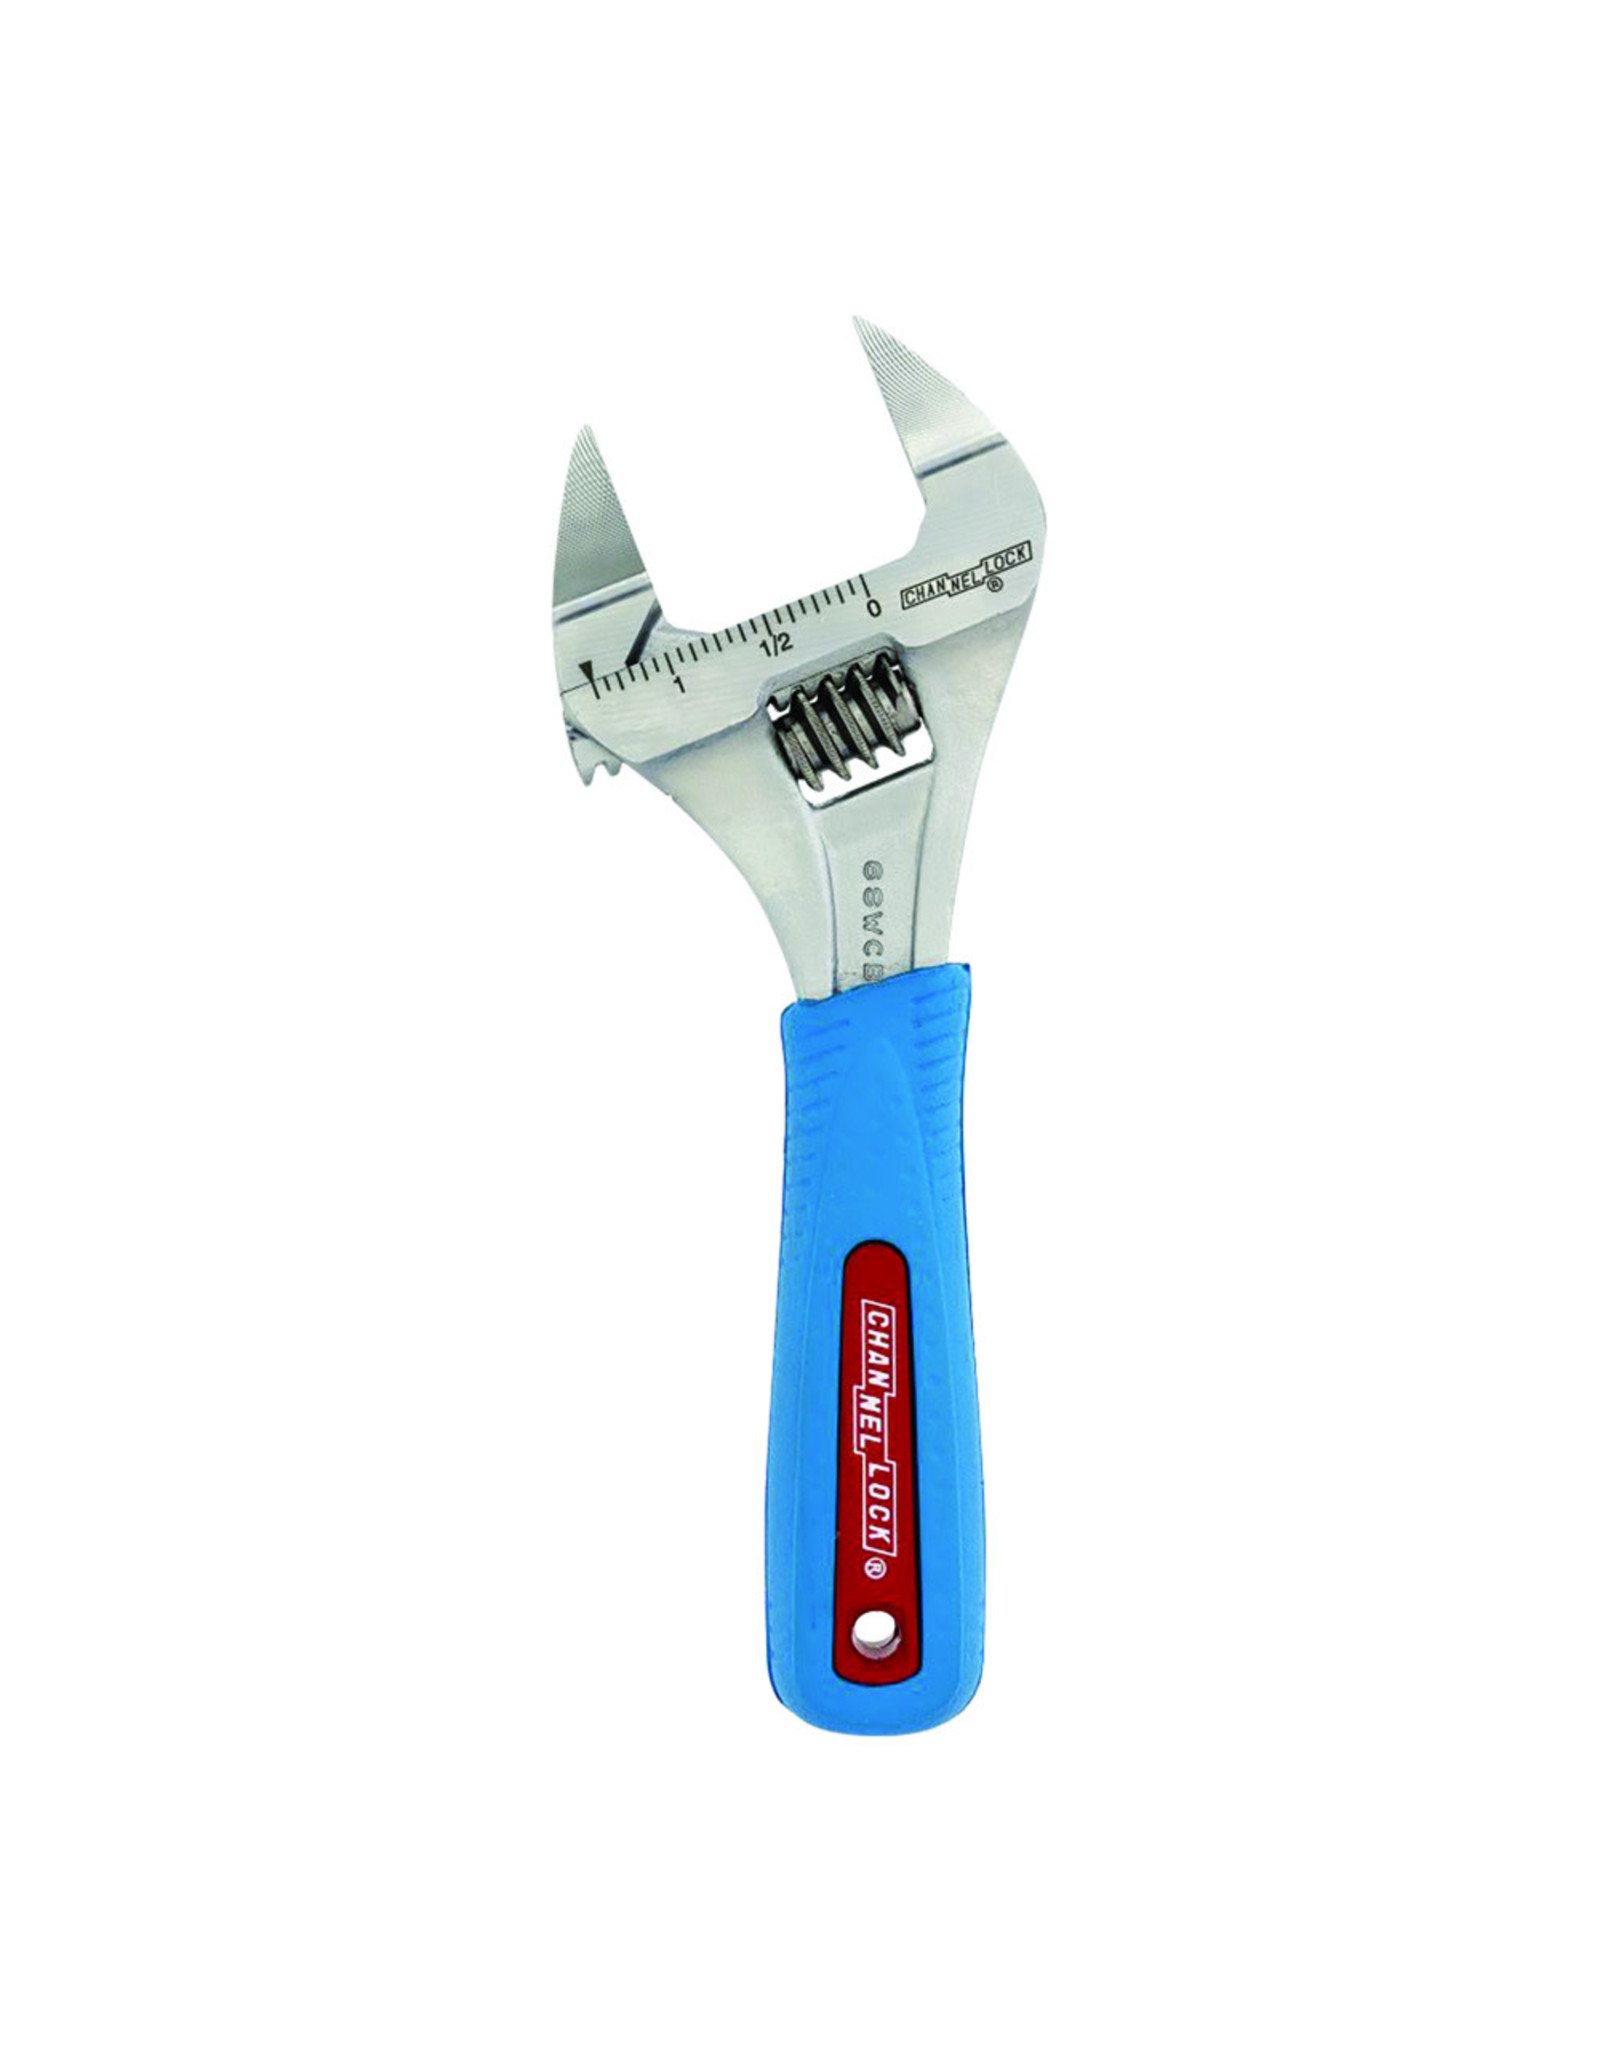 Channellock® 6 in. Xtra Slim Jaw Wideazz® Adjustable Wrench